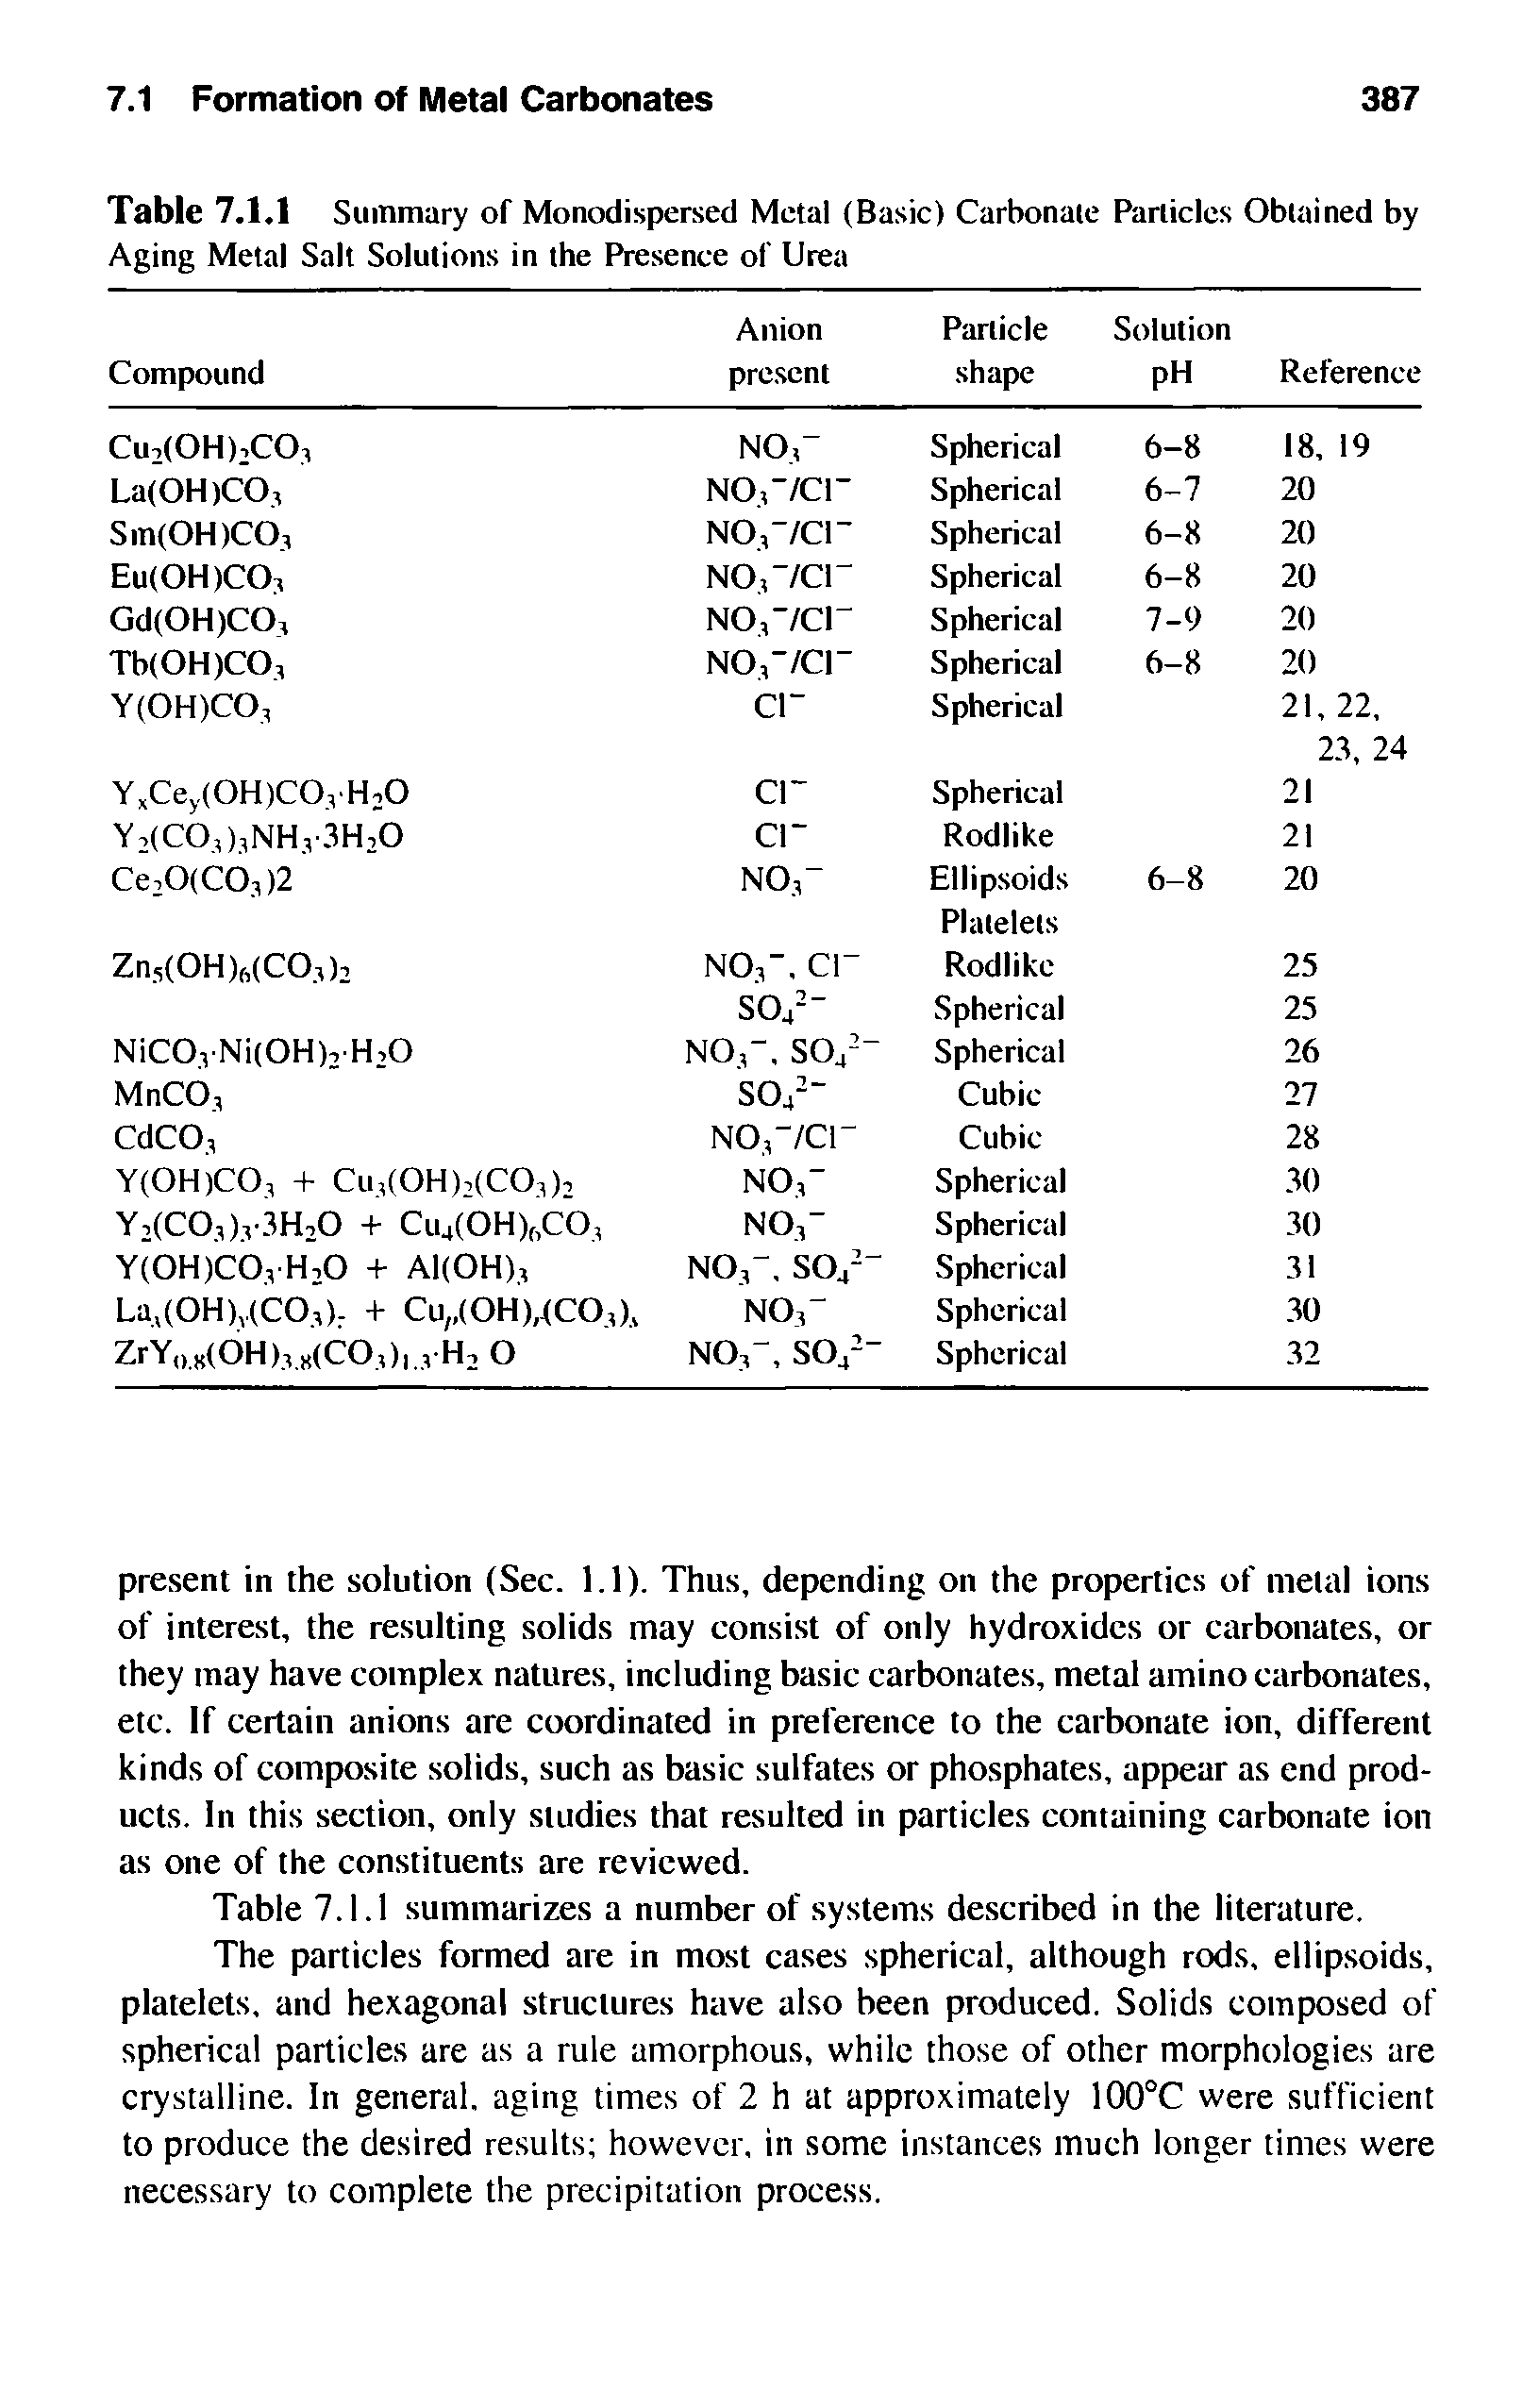 Table 7.1.1 Summary of Monodispersed Metal (Basic) Carbonate Particles Obtained by Aging Metal Salt Solutions in the Presence of Urea...